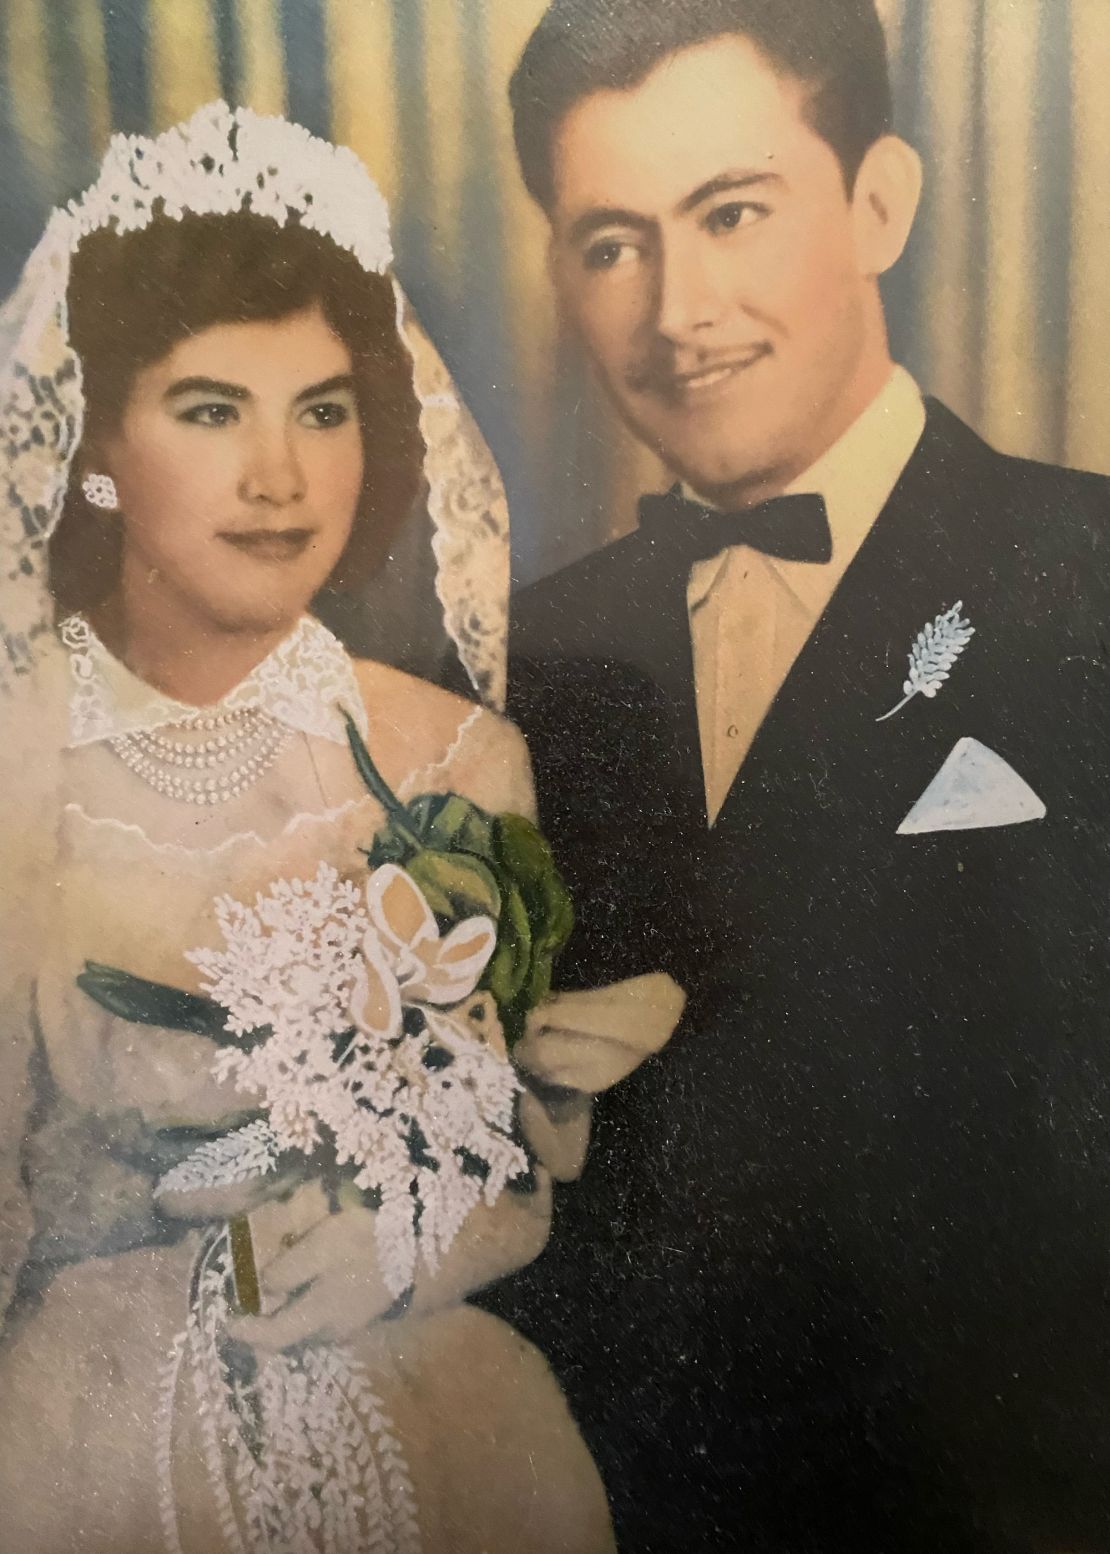 Corral and his wife, Maria, married in Mexico in 1956. Three weeks later, he returned to the US to resume work as a <em>bracero</em>.